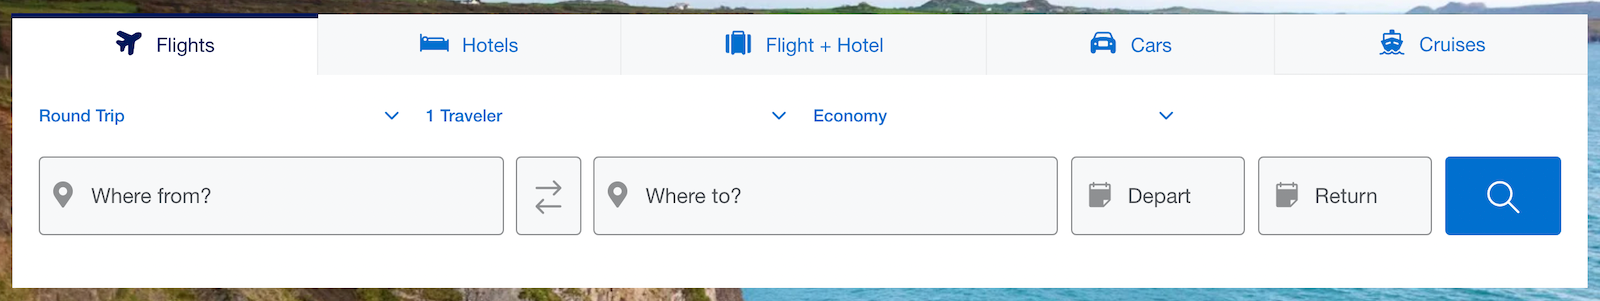 a travel booking website showing input fields for flight searches